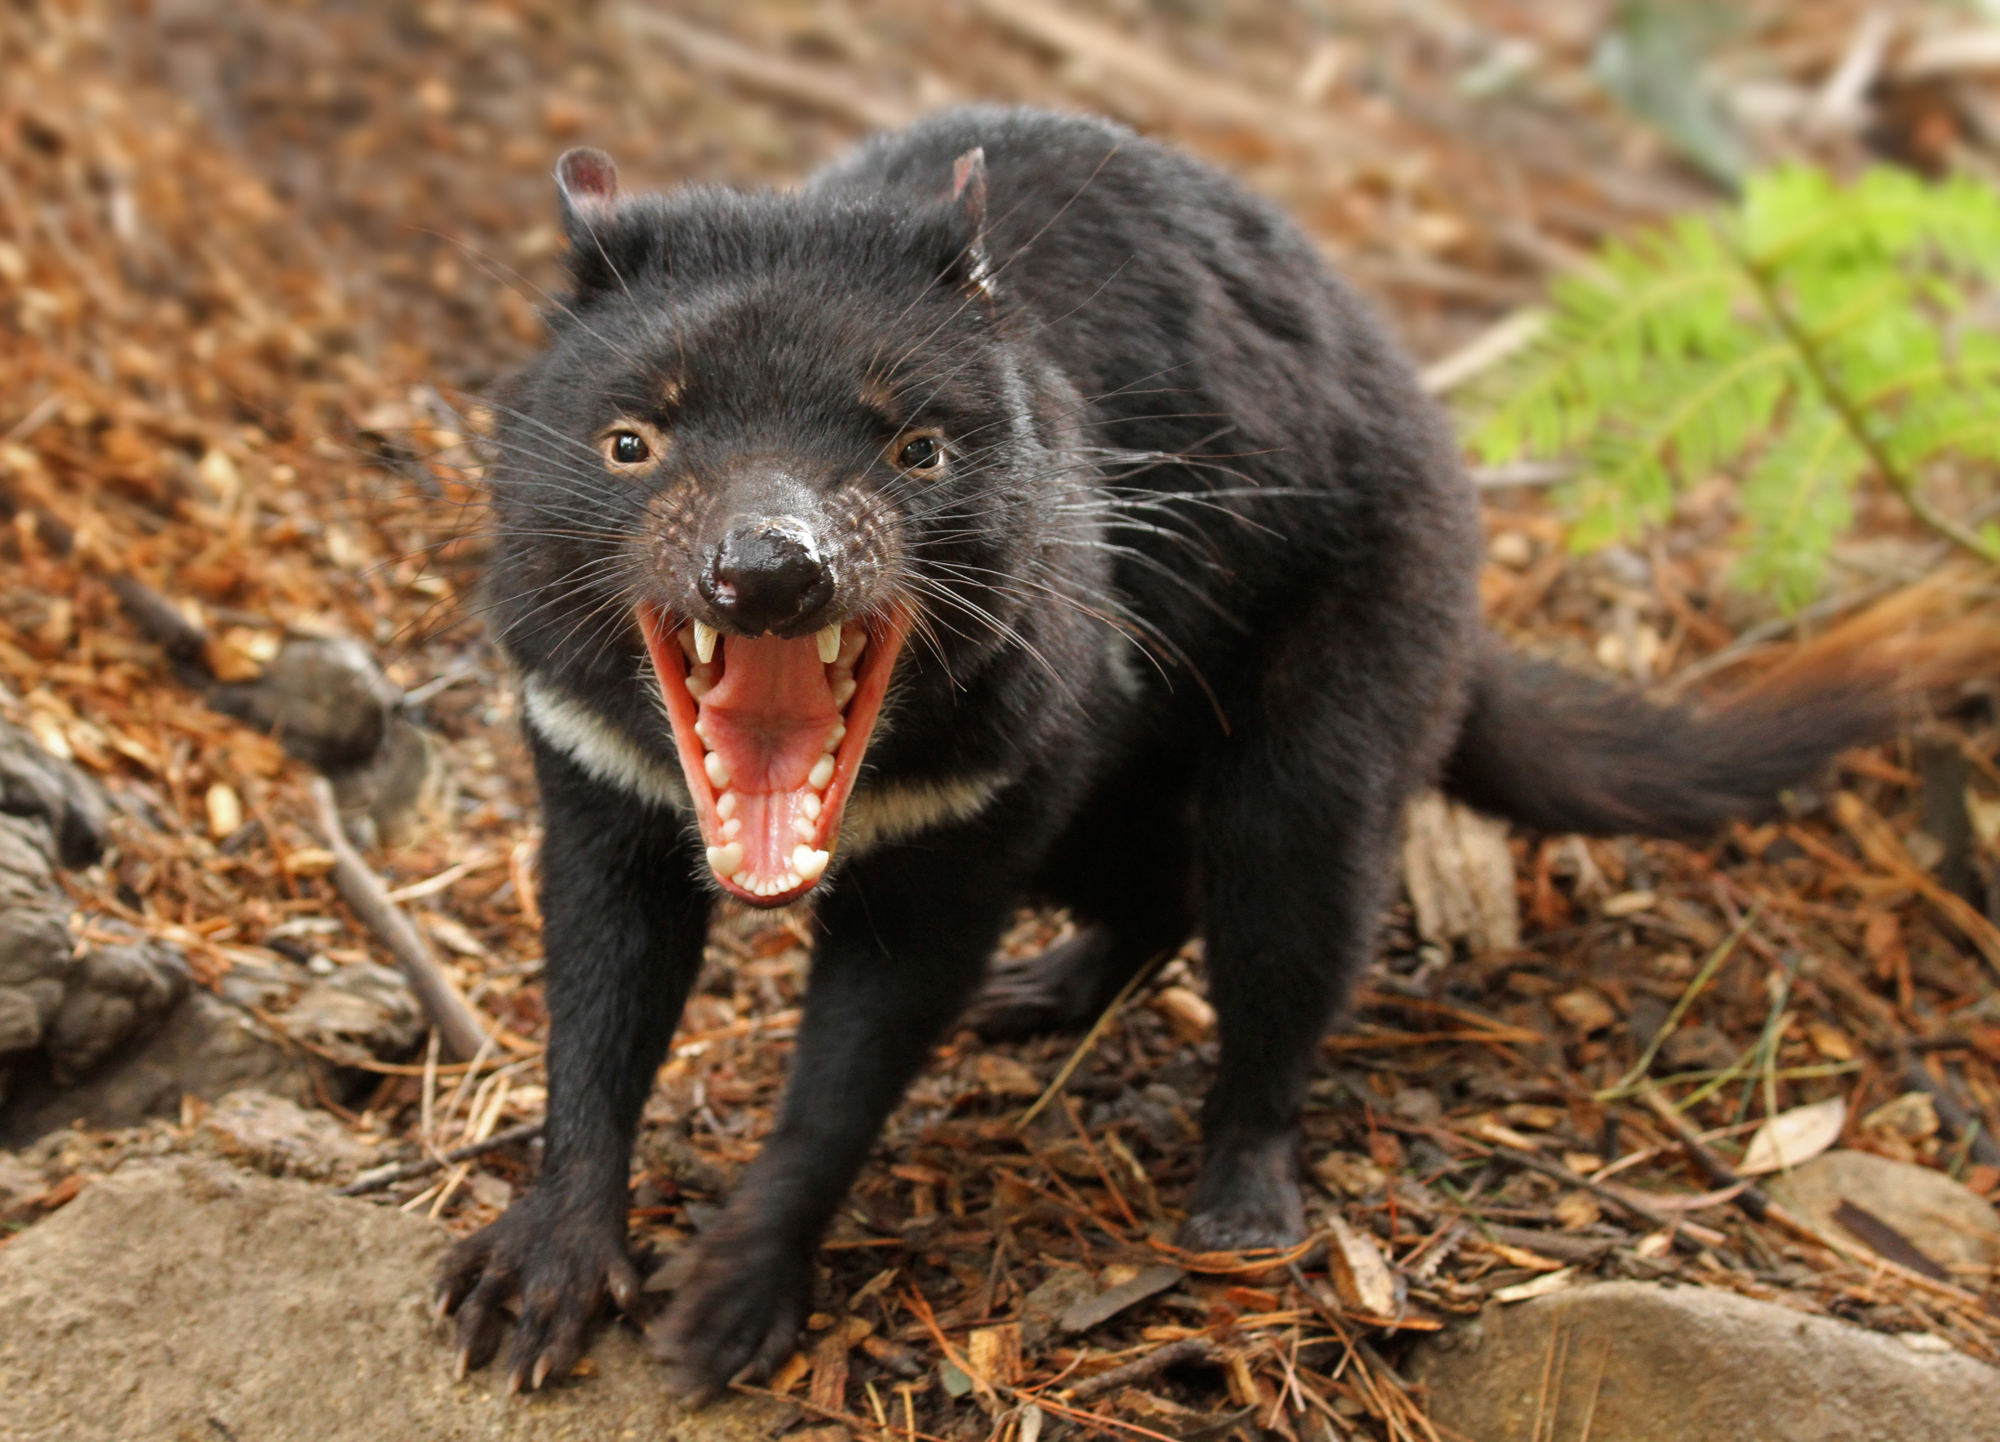 Tasmanian devil history and some interesting facts